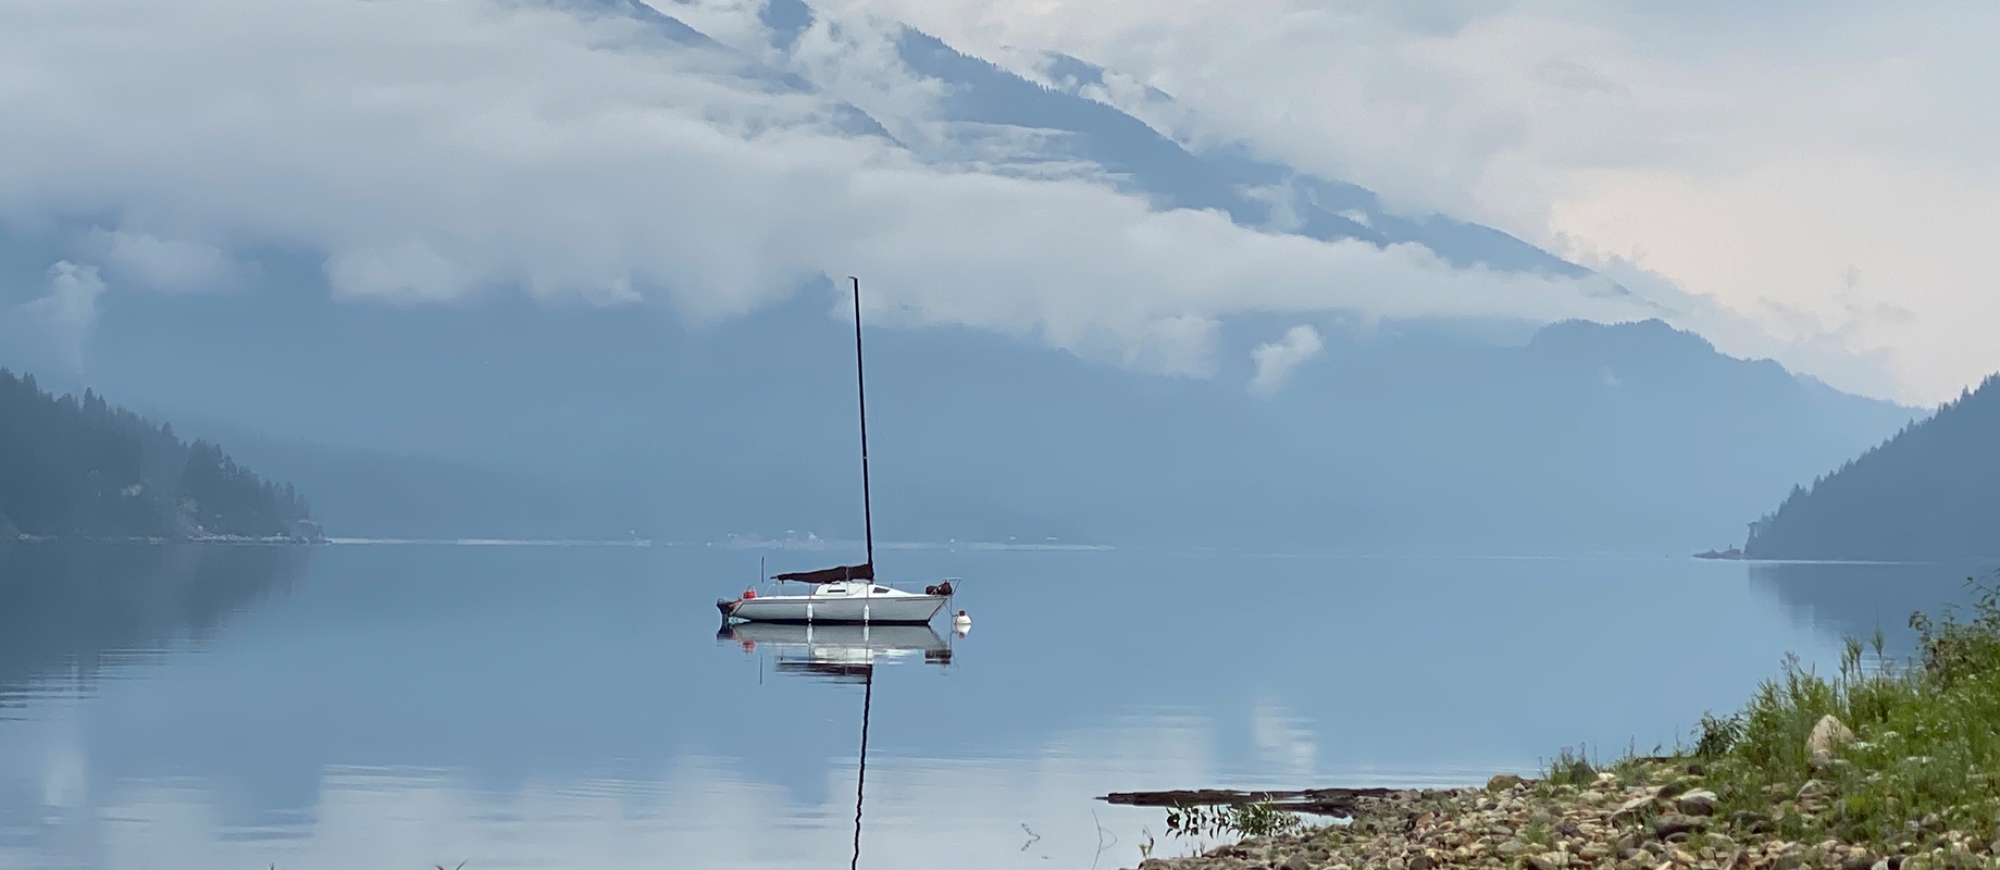 Boat on Kootenay Lake with low hanging clouds.